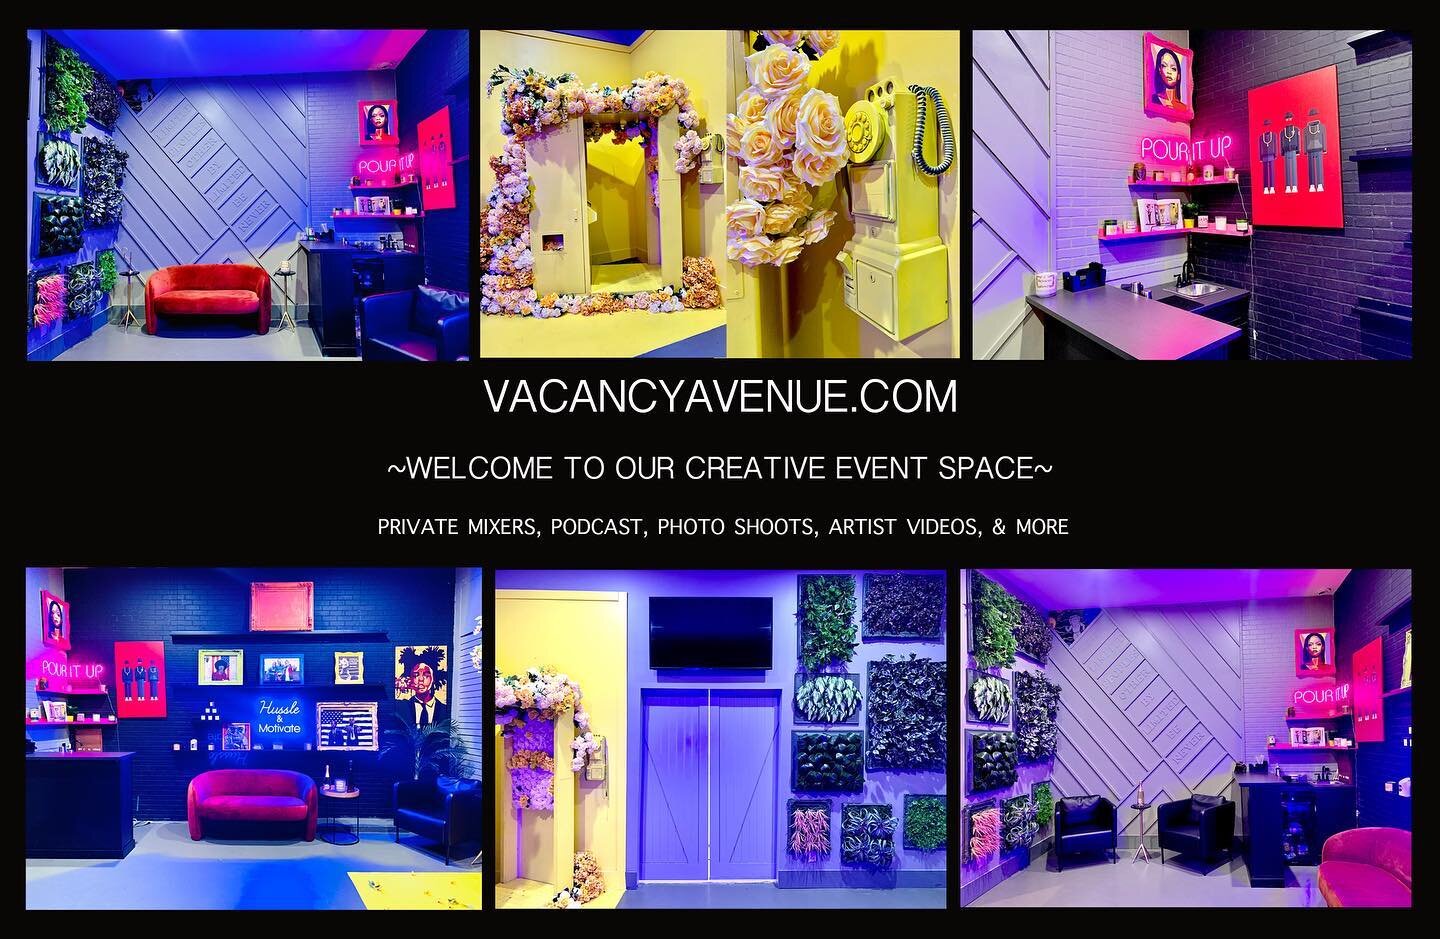 ~Custom built with love~  #goodenergyzone built for creatives #inglewood #directors  #producers #artist #cinematography #photoshoots #models #artists #designers #fashionblogger #idealist #creativedirectors ~schedule a walkthrough today~🏁 #vacancyave